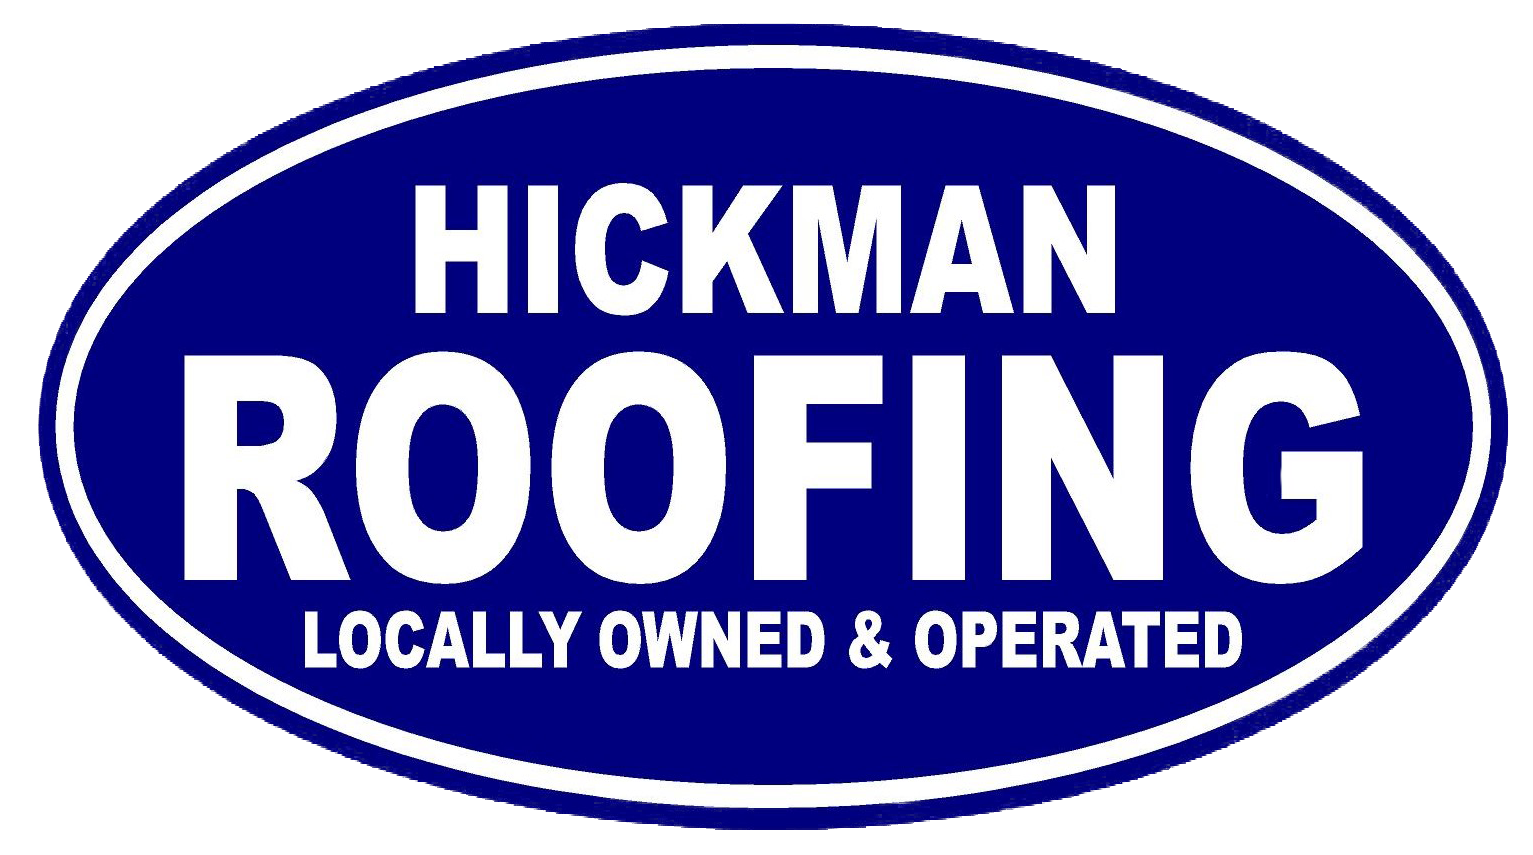 Hickman Roofing